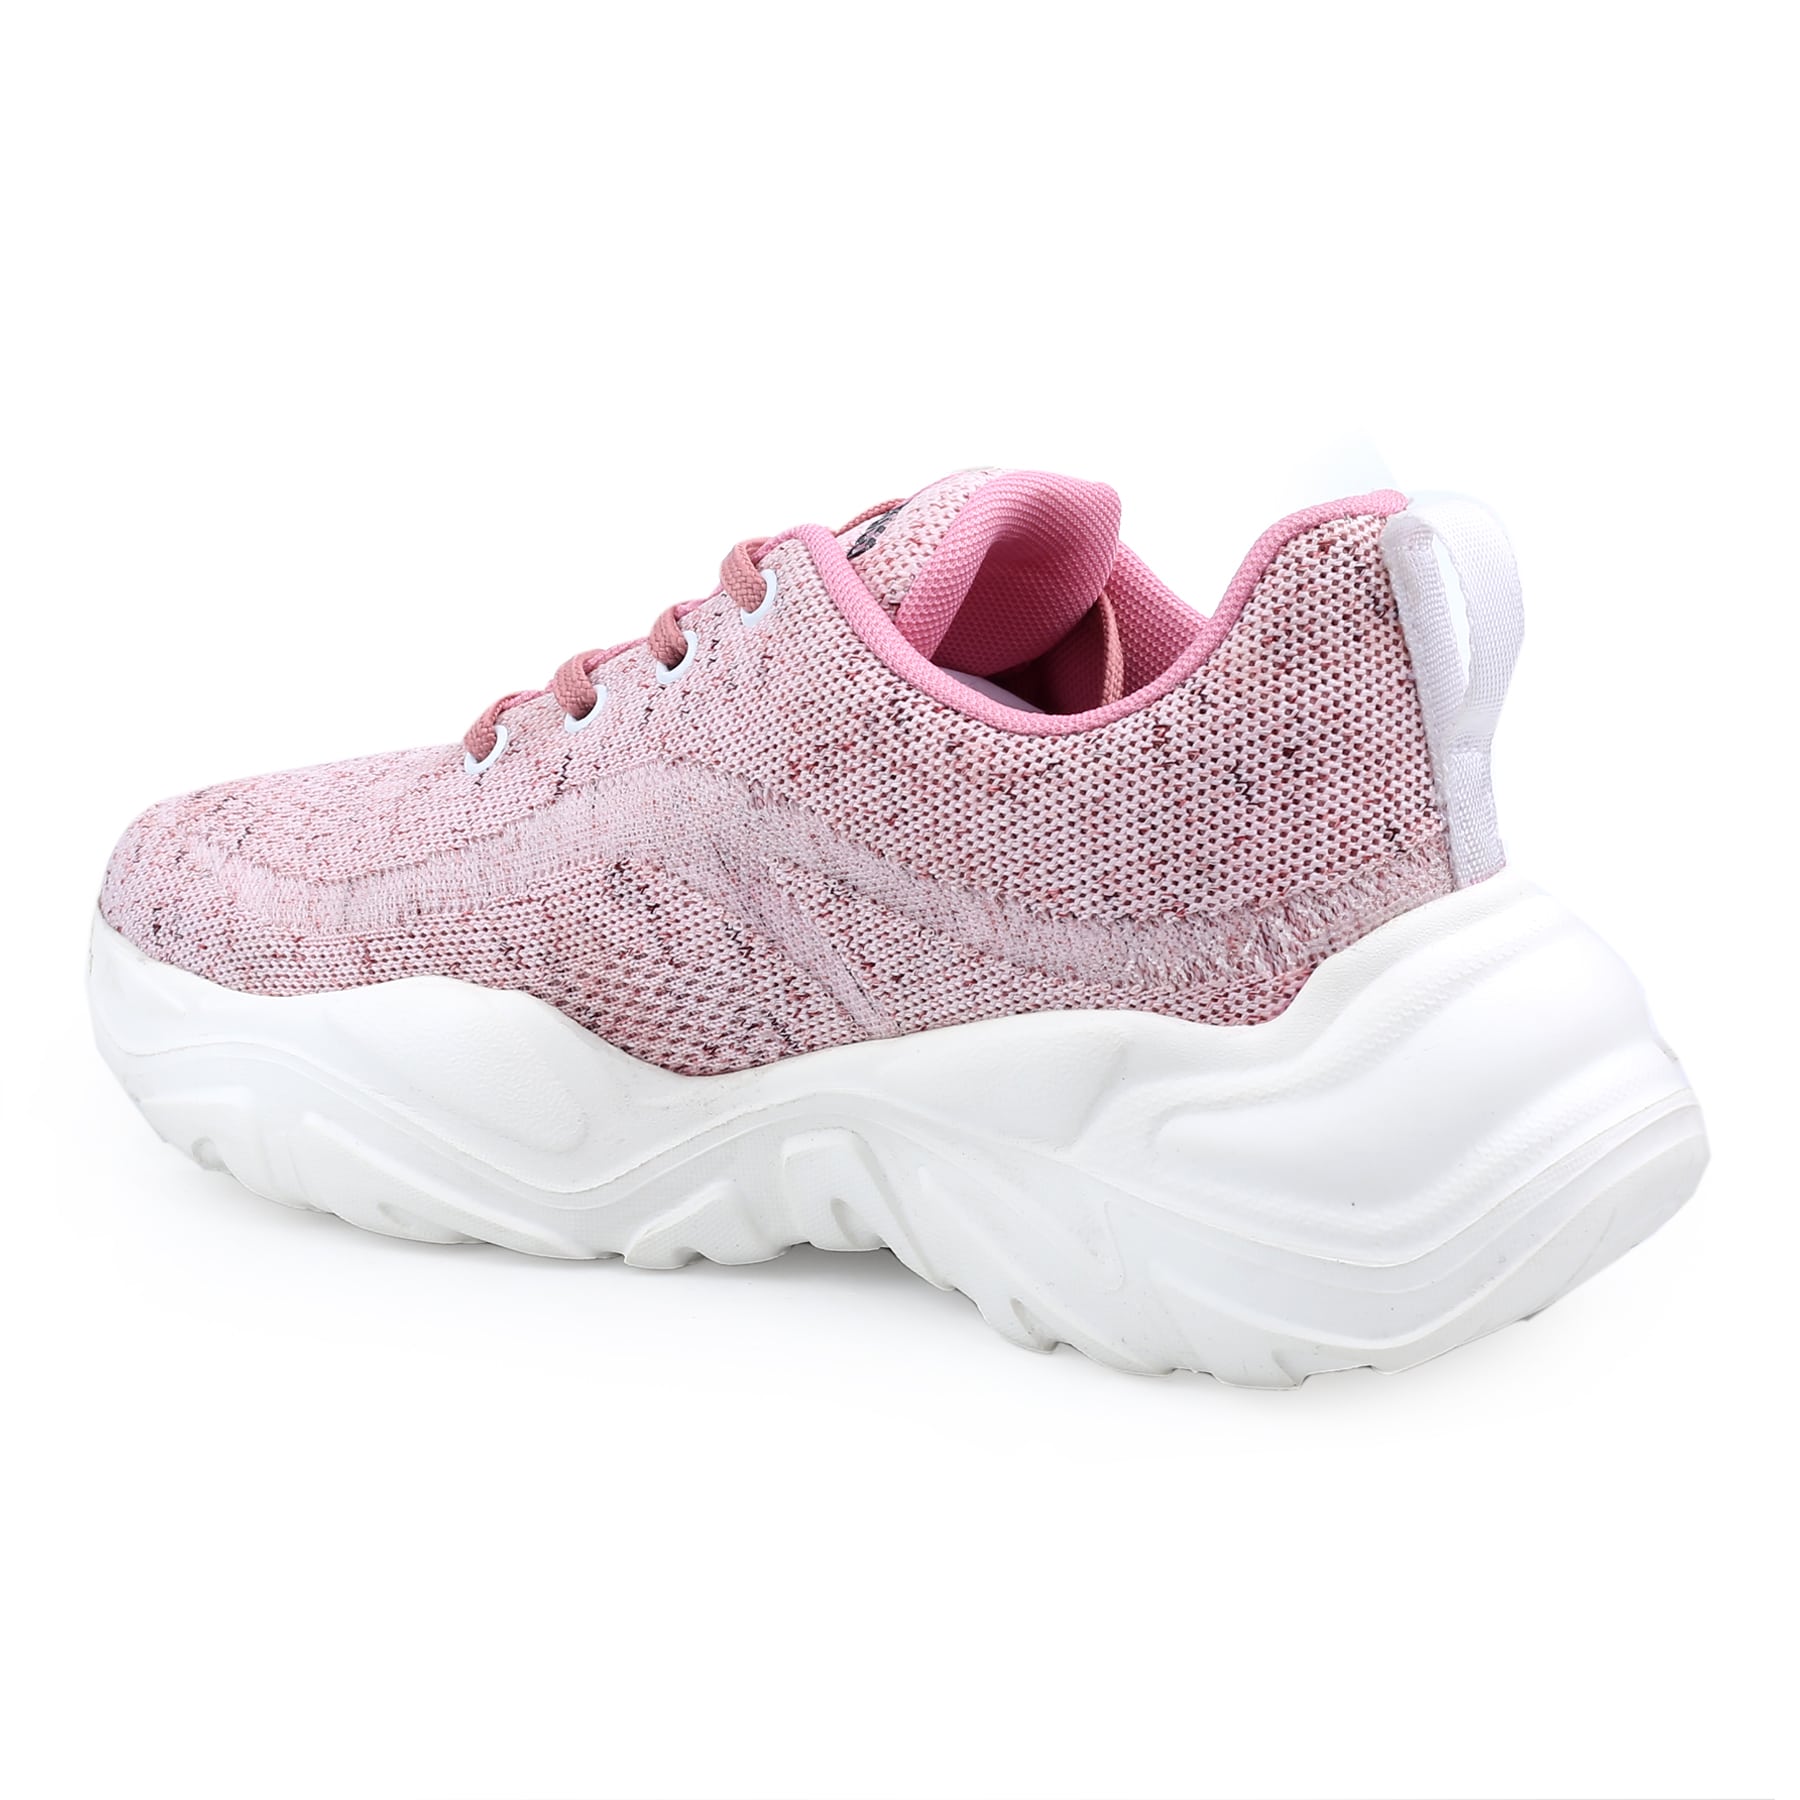 Bacca Bucci BUBBLES Women Chunky Platform Sneakers | Casual Fashion Shoes with Lightweight Sole